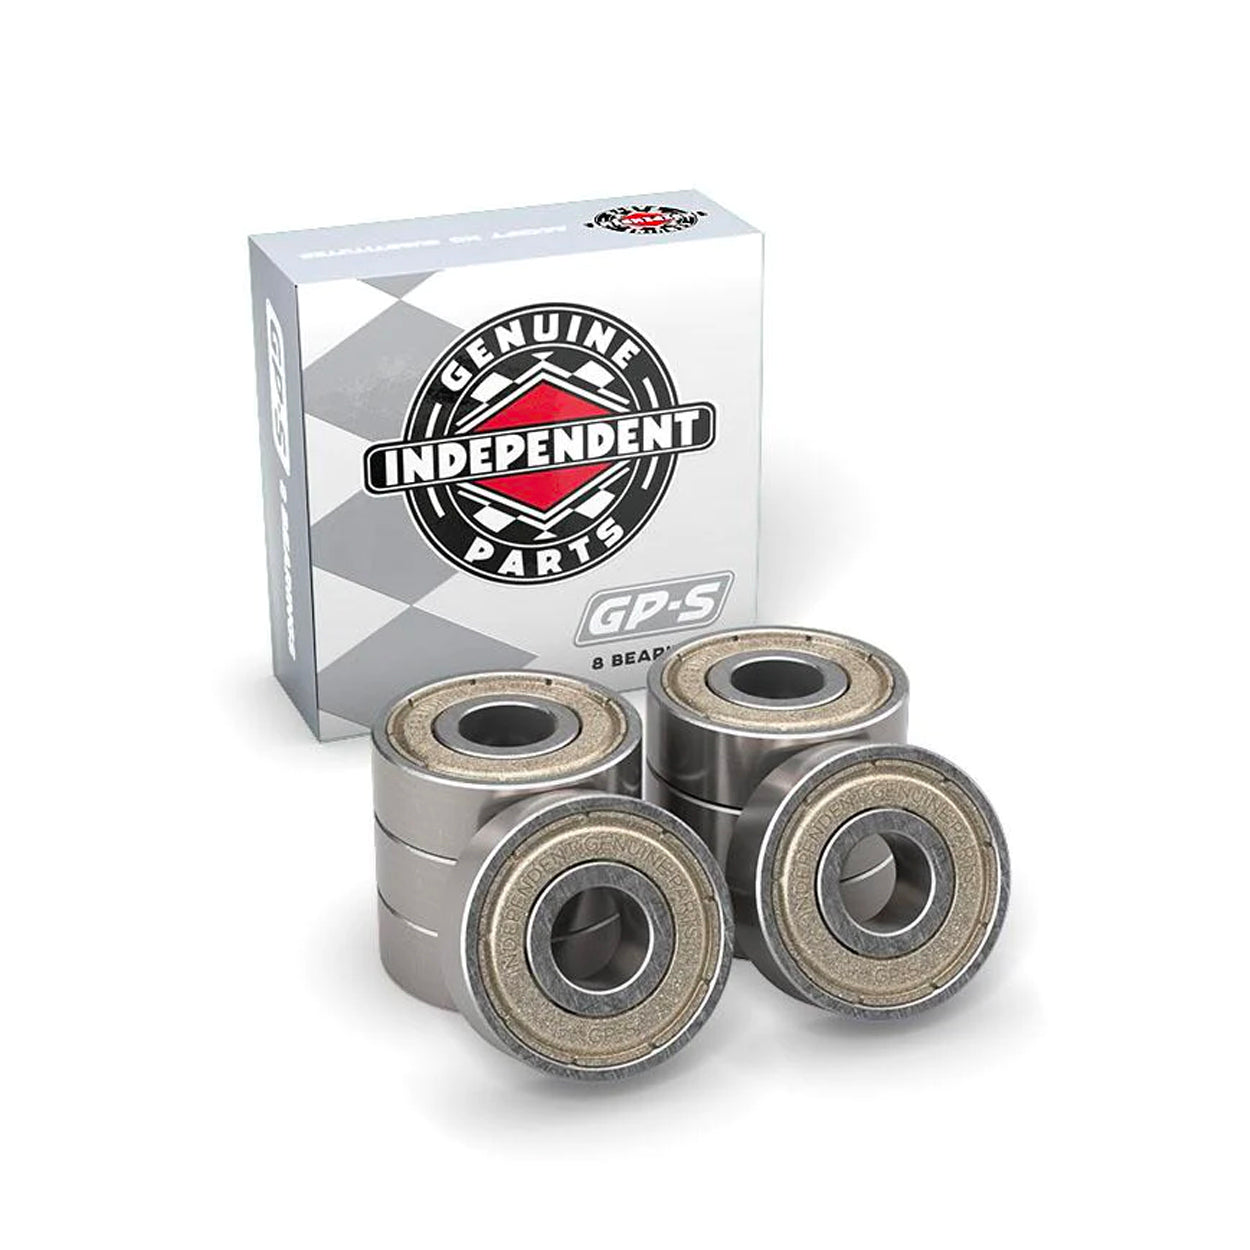 Independent Bearings Genuine Parts Bearing GP-S 8 MM -Silver - Prime Delux Store